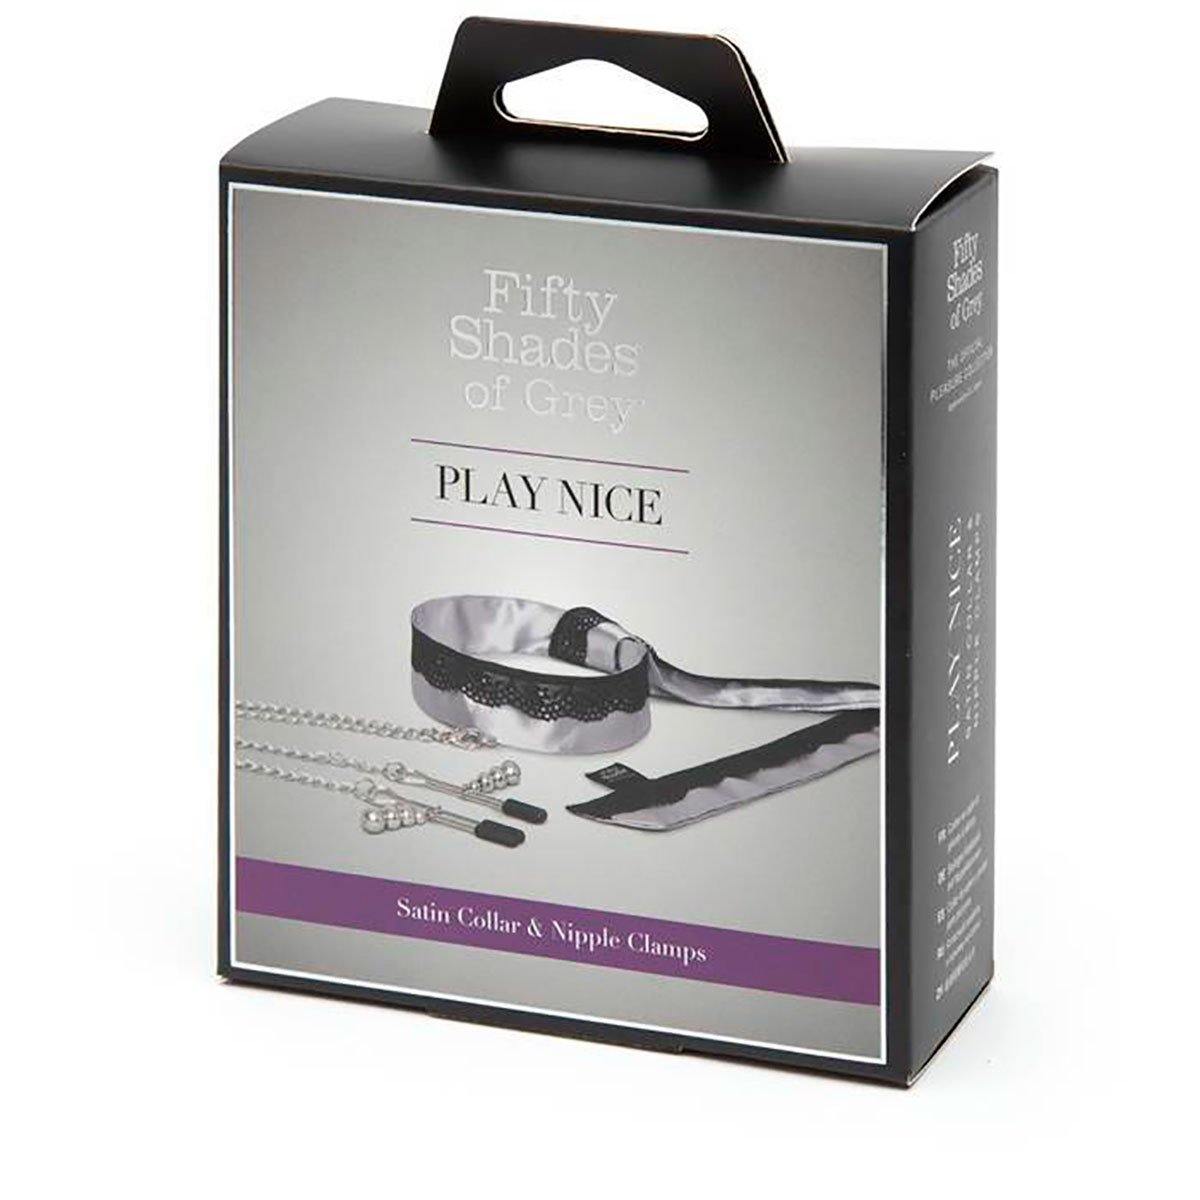 Fifty Shades - Play Nice Satin Collar & Nip Clamps - Buy At Luxury Toy X - Free 3-Day Shipping